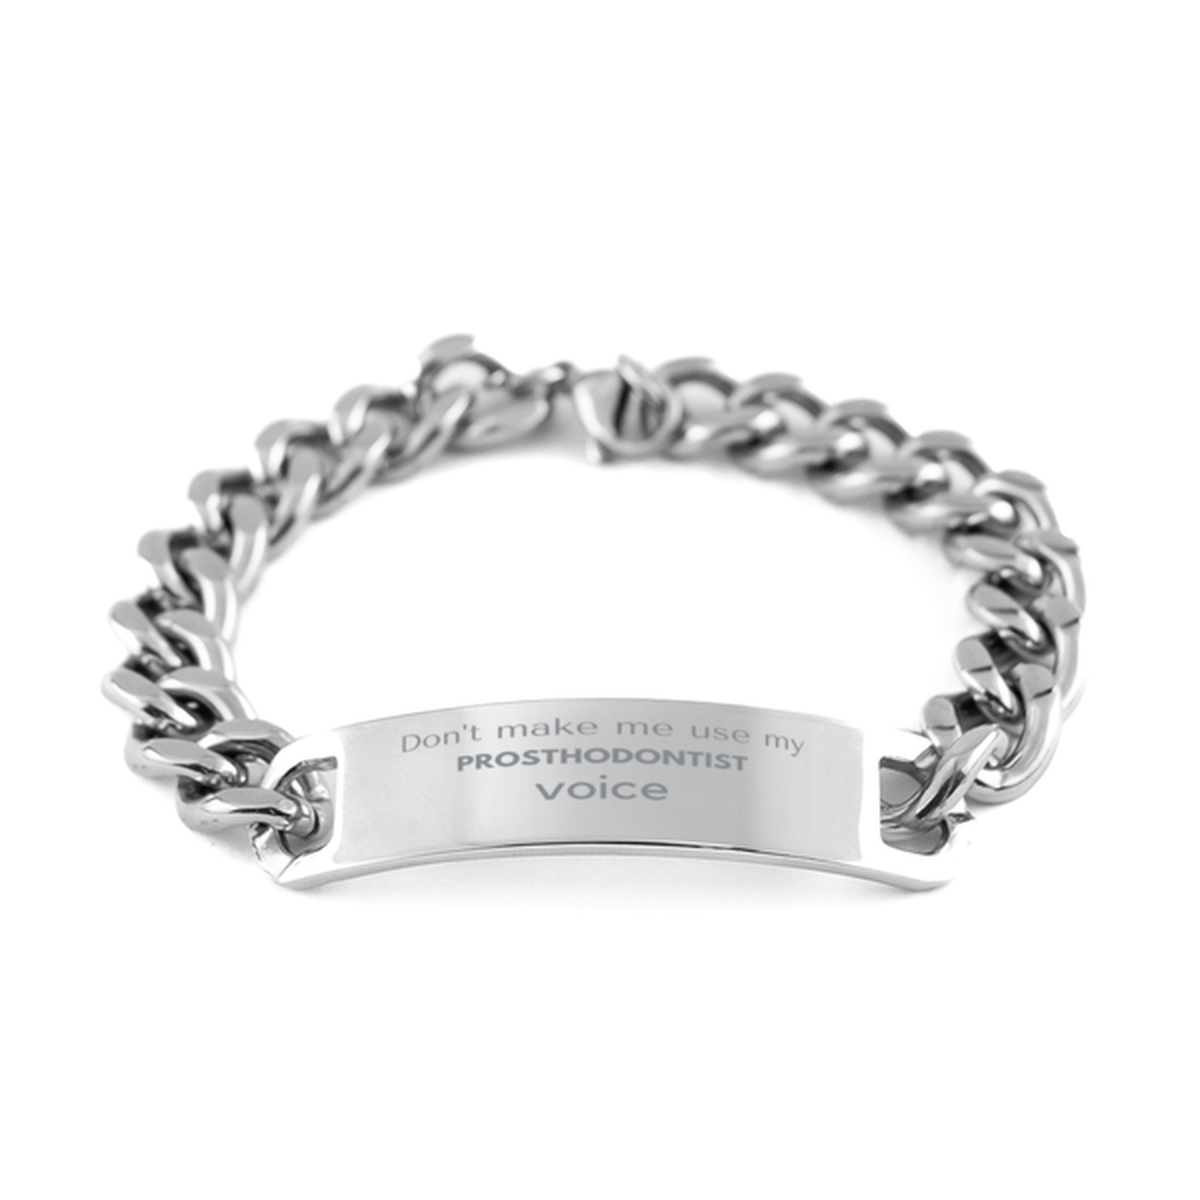 Don't make me use my Prosthodontist voice, Sarcasm Prosthodontist Gifts, Christmas Prosthodontist Cuban Chain Stainless Steel Bracelet Birthday Unique Gifts For Prosthodontist Coworkers, Men, Women, Colleague, Friends